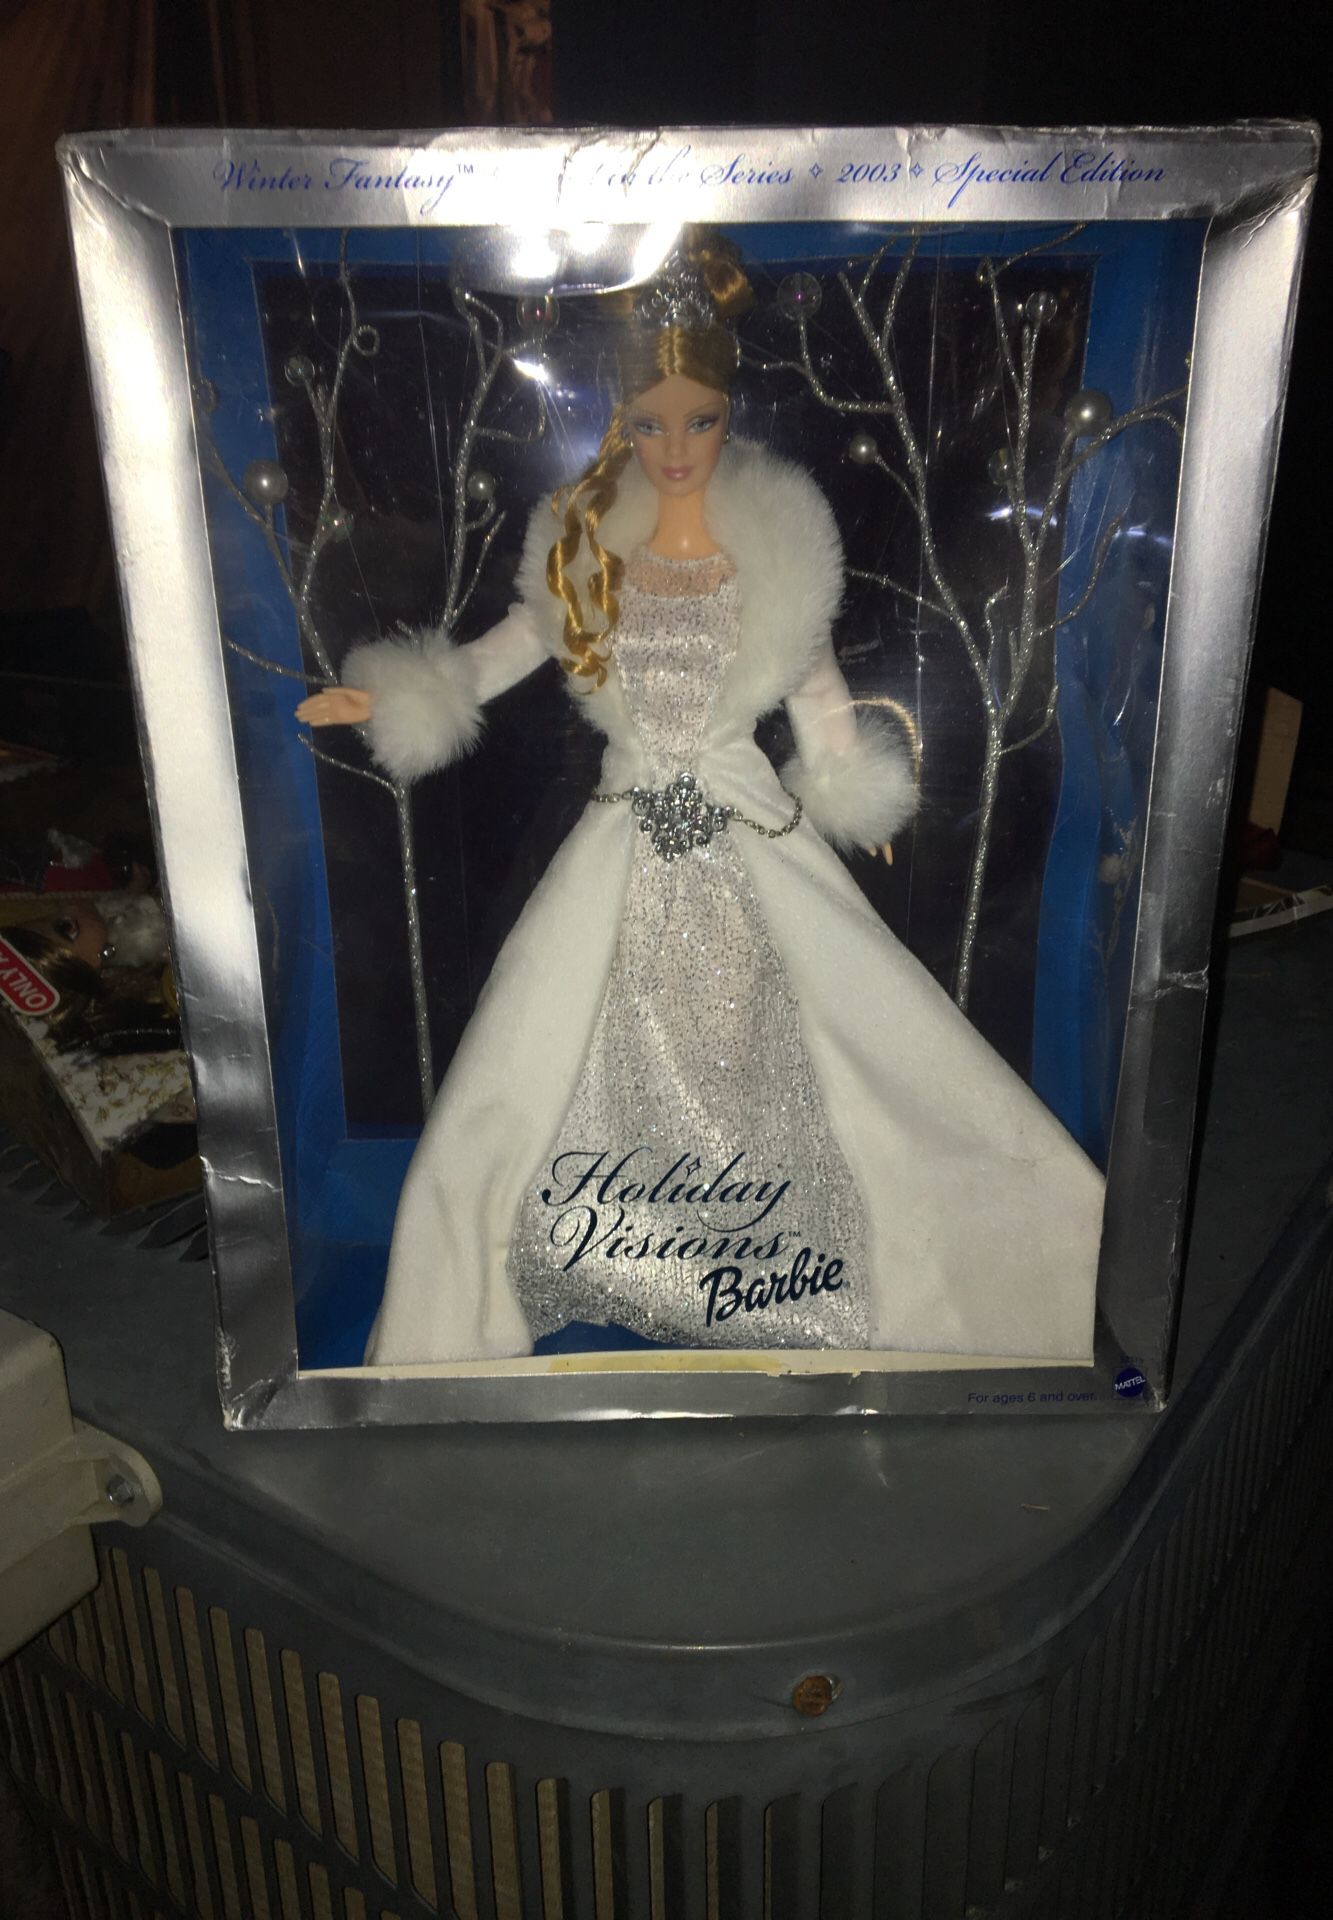 Vintage 2003 WINTER FANTASY FIRST IN THE SERIES HOLIDAY VISIONS BARBIE